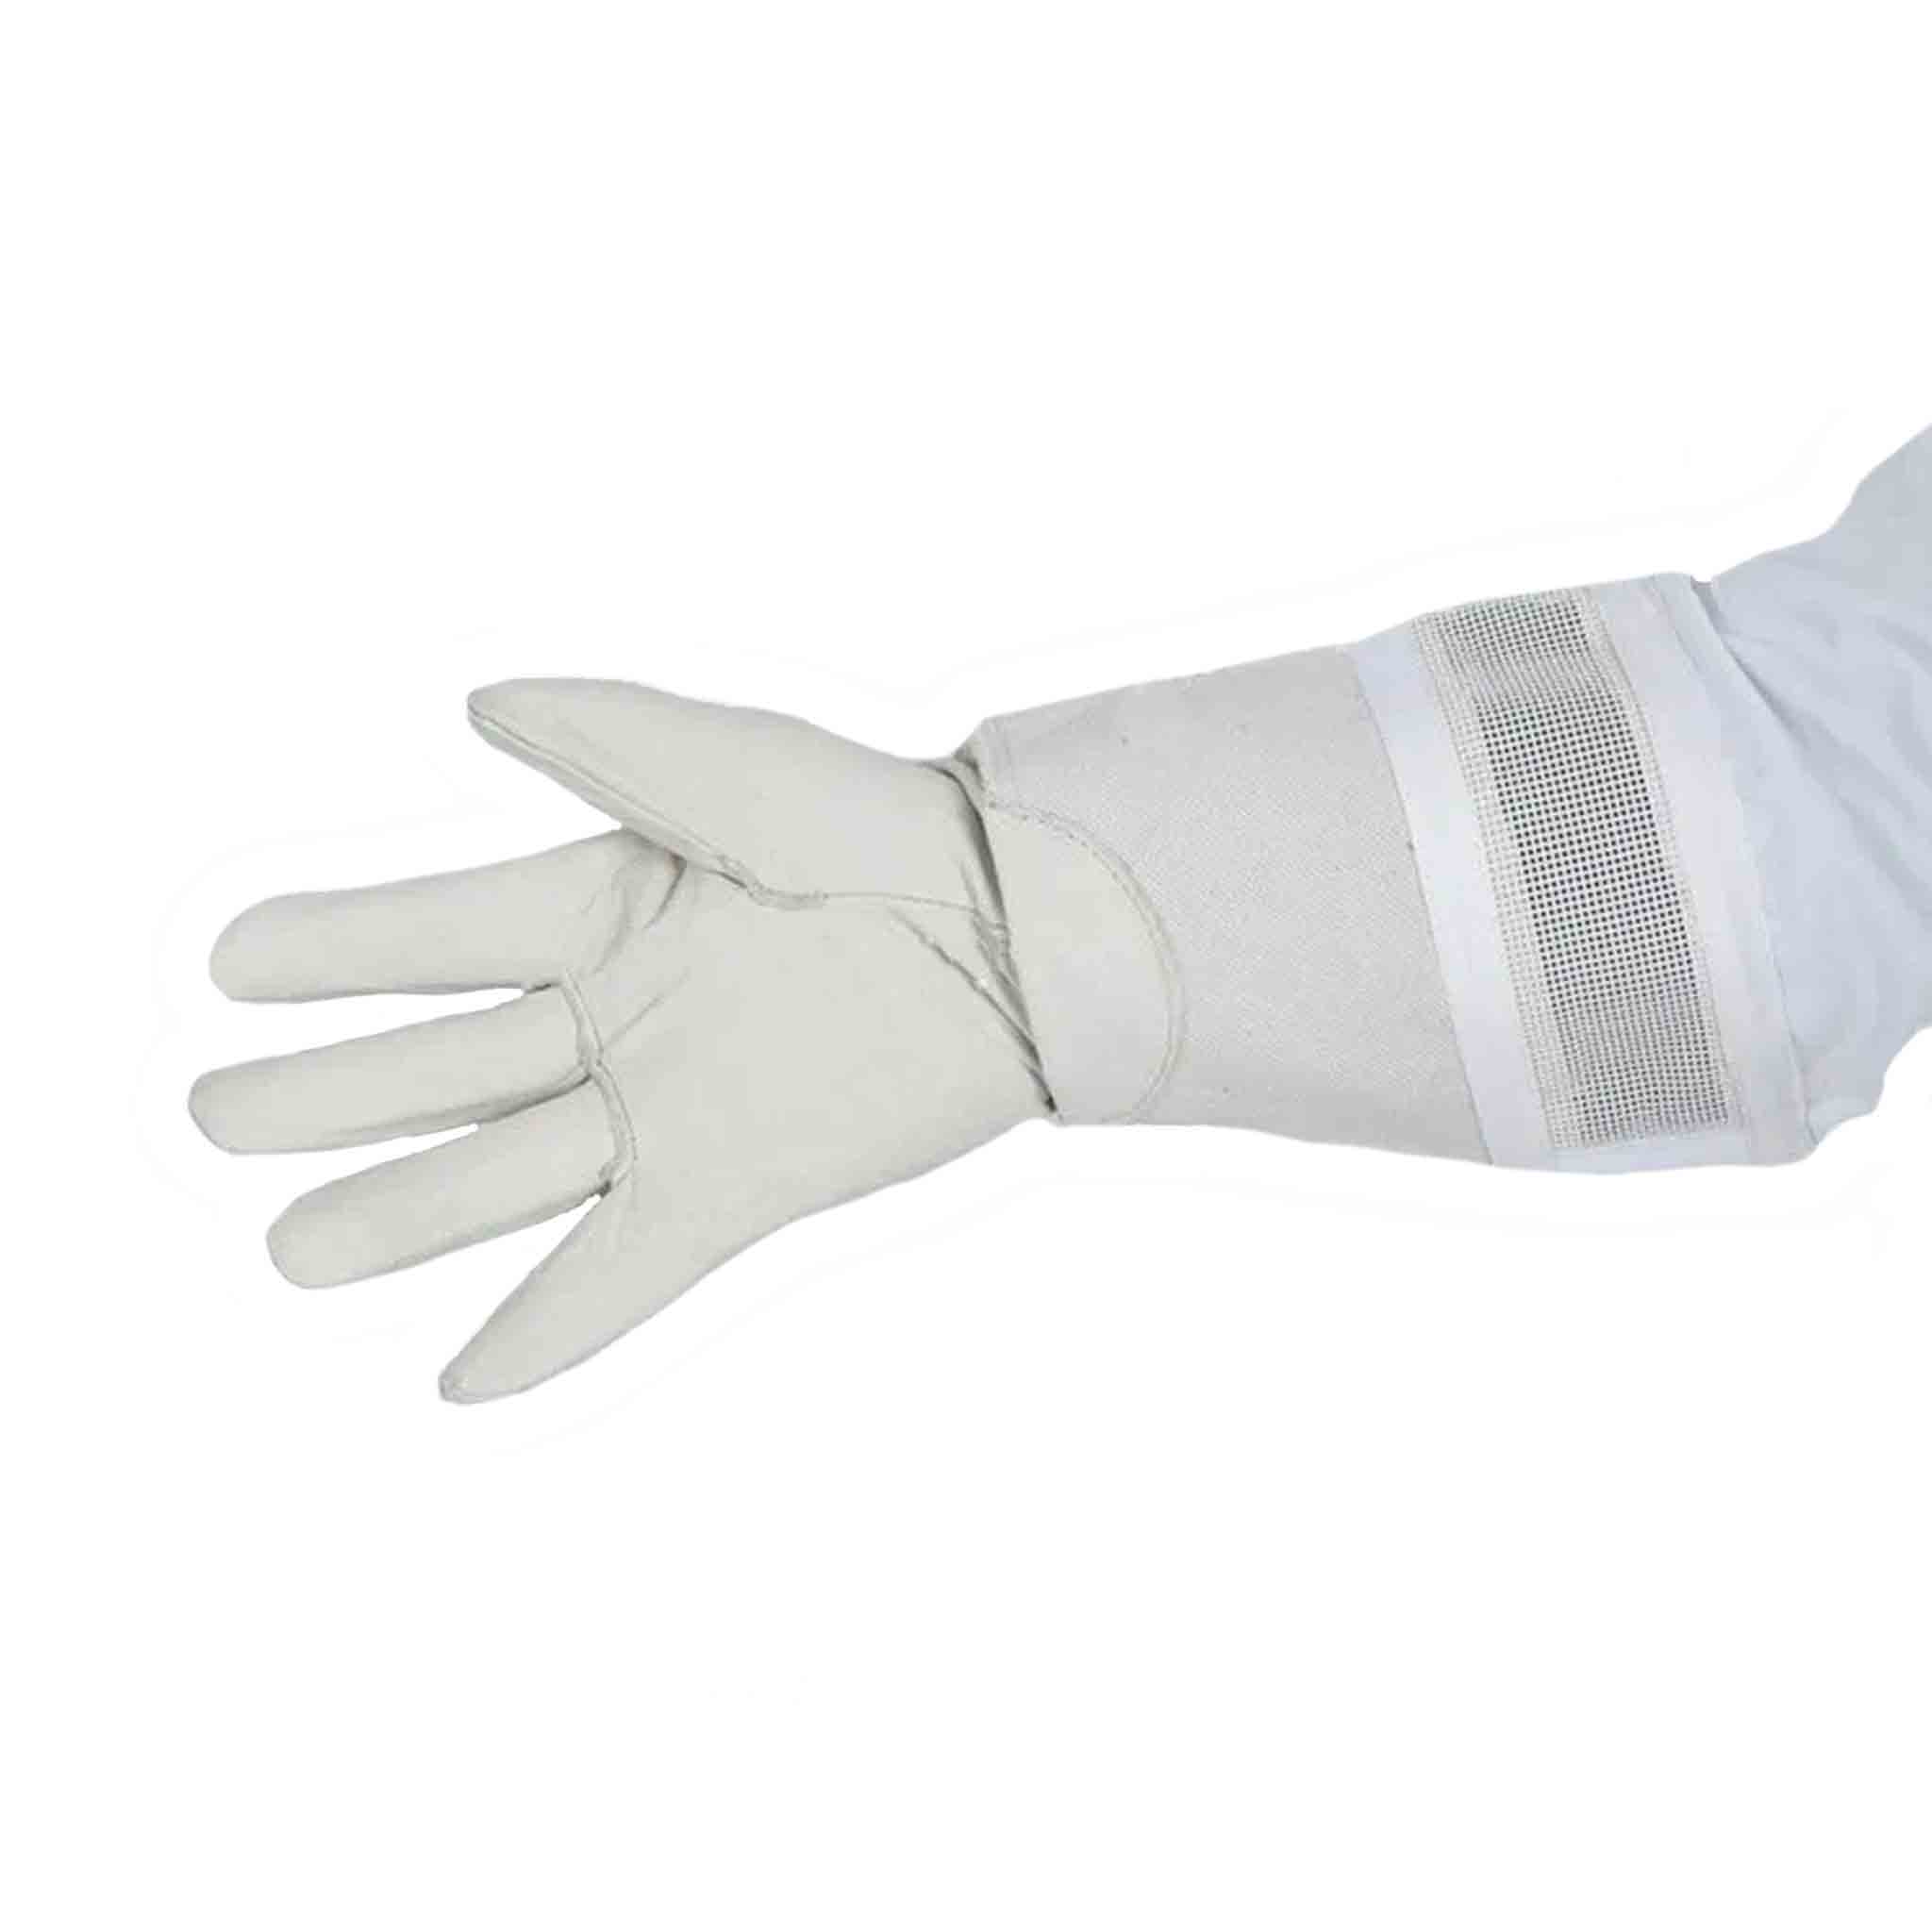 High Quality Long Sleeve Ventilate Beekeeping Protective Gloves - Clothing collection by Buzzbee Beekeeping Supplies